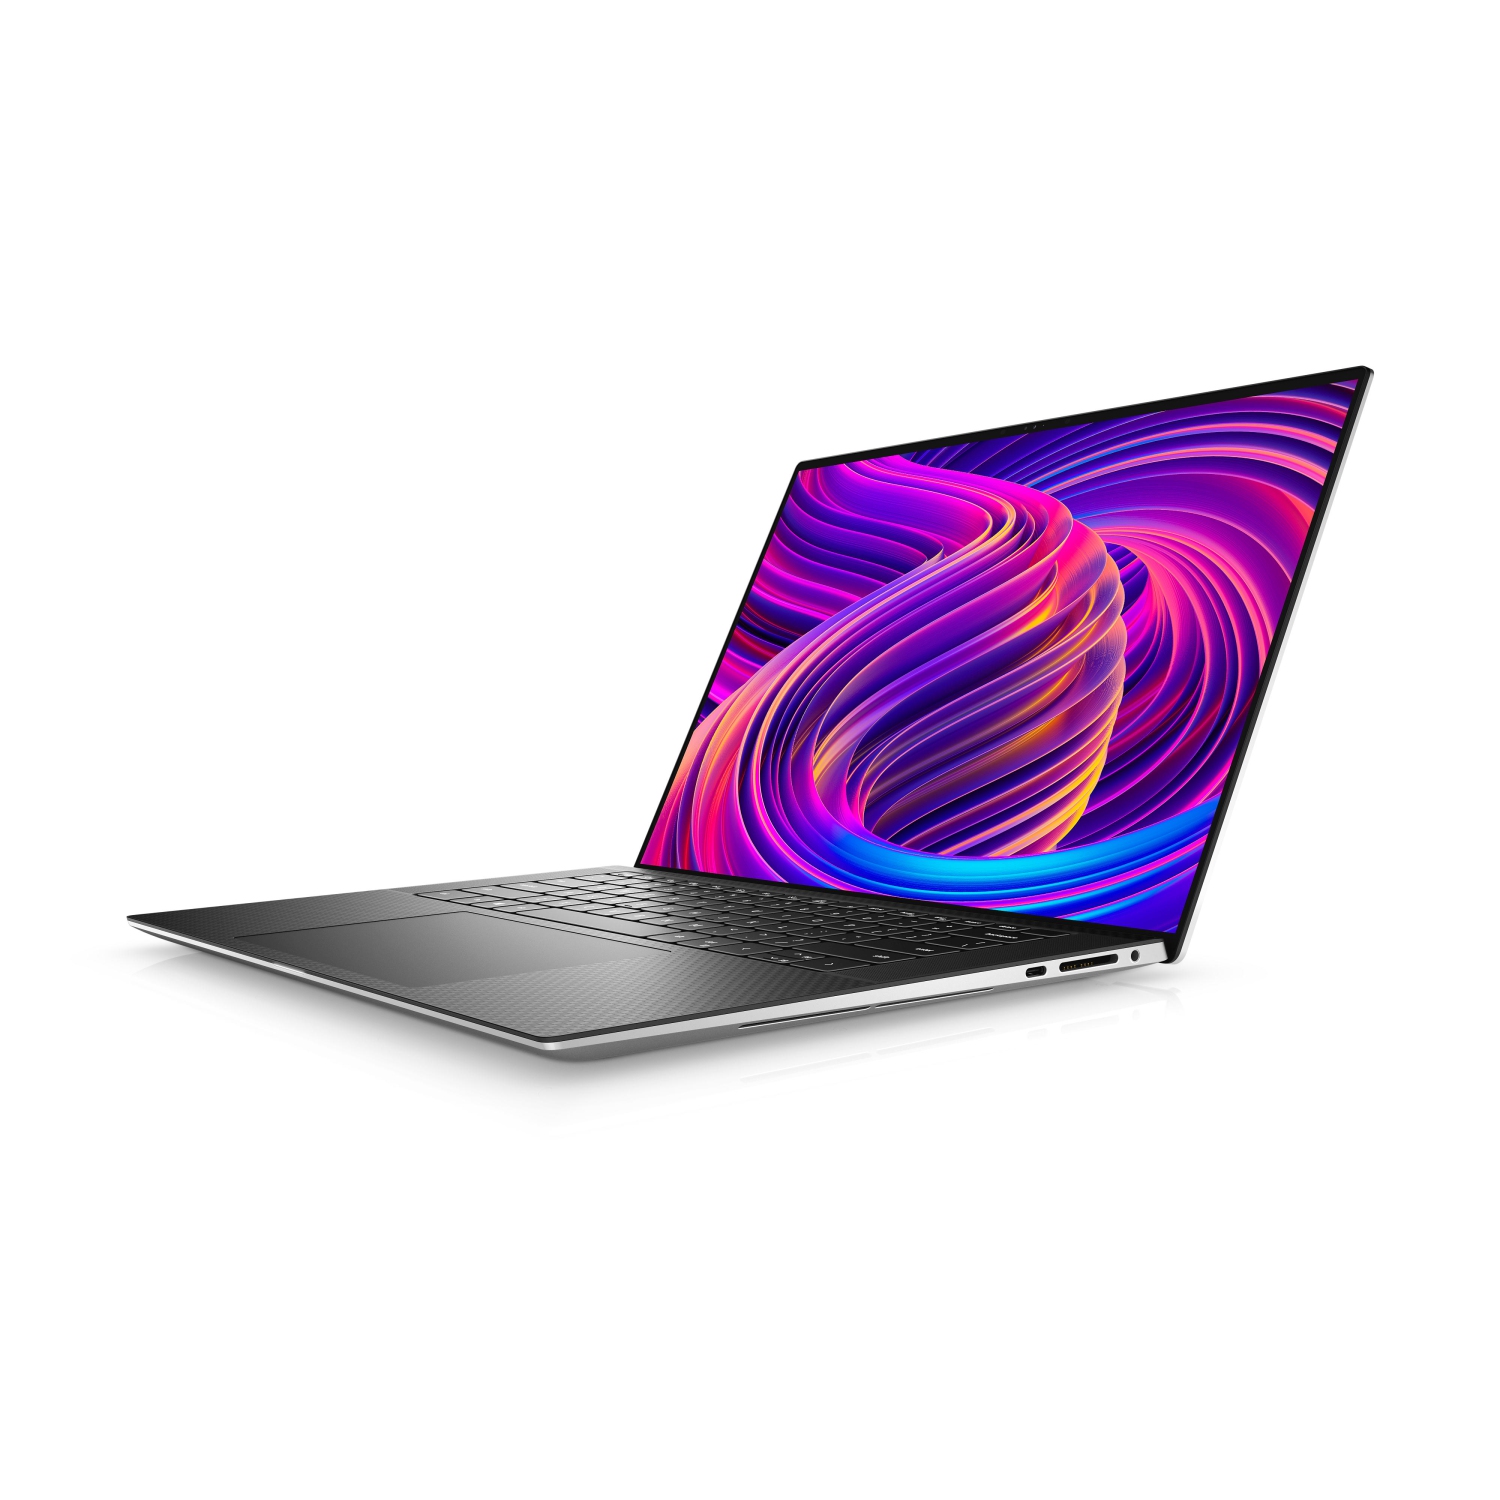 Refurbished (Excellent) - Dell XPS 15 9510 Laptop (2021), 15.6" 4K Touch, Core i7 - 512GB SSD - 16GB RAM - 3050 Ti, 8 Cores @ 4.6 GHz - 11th Gen CPU Certified Refurbished